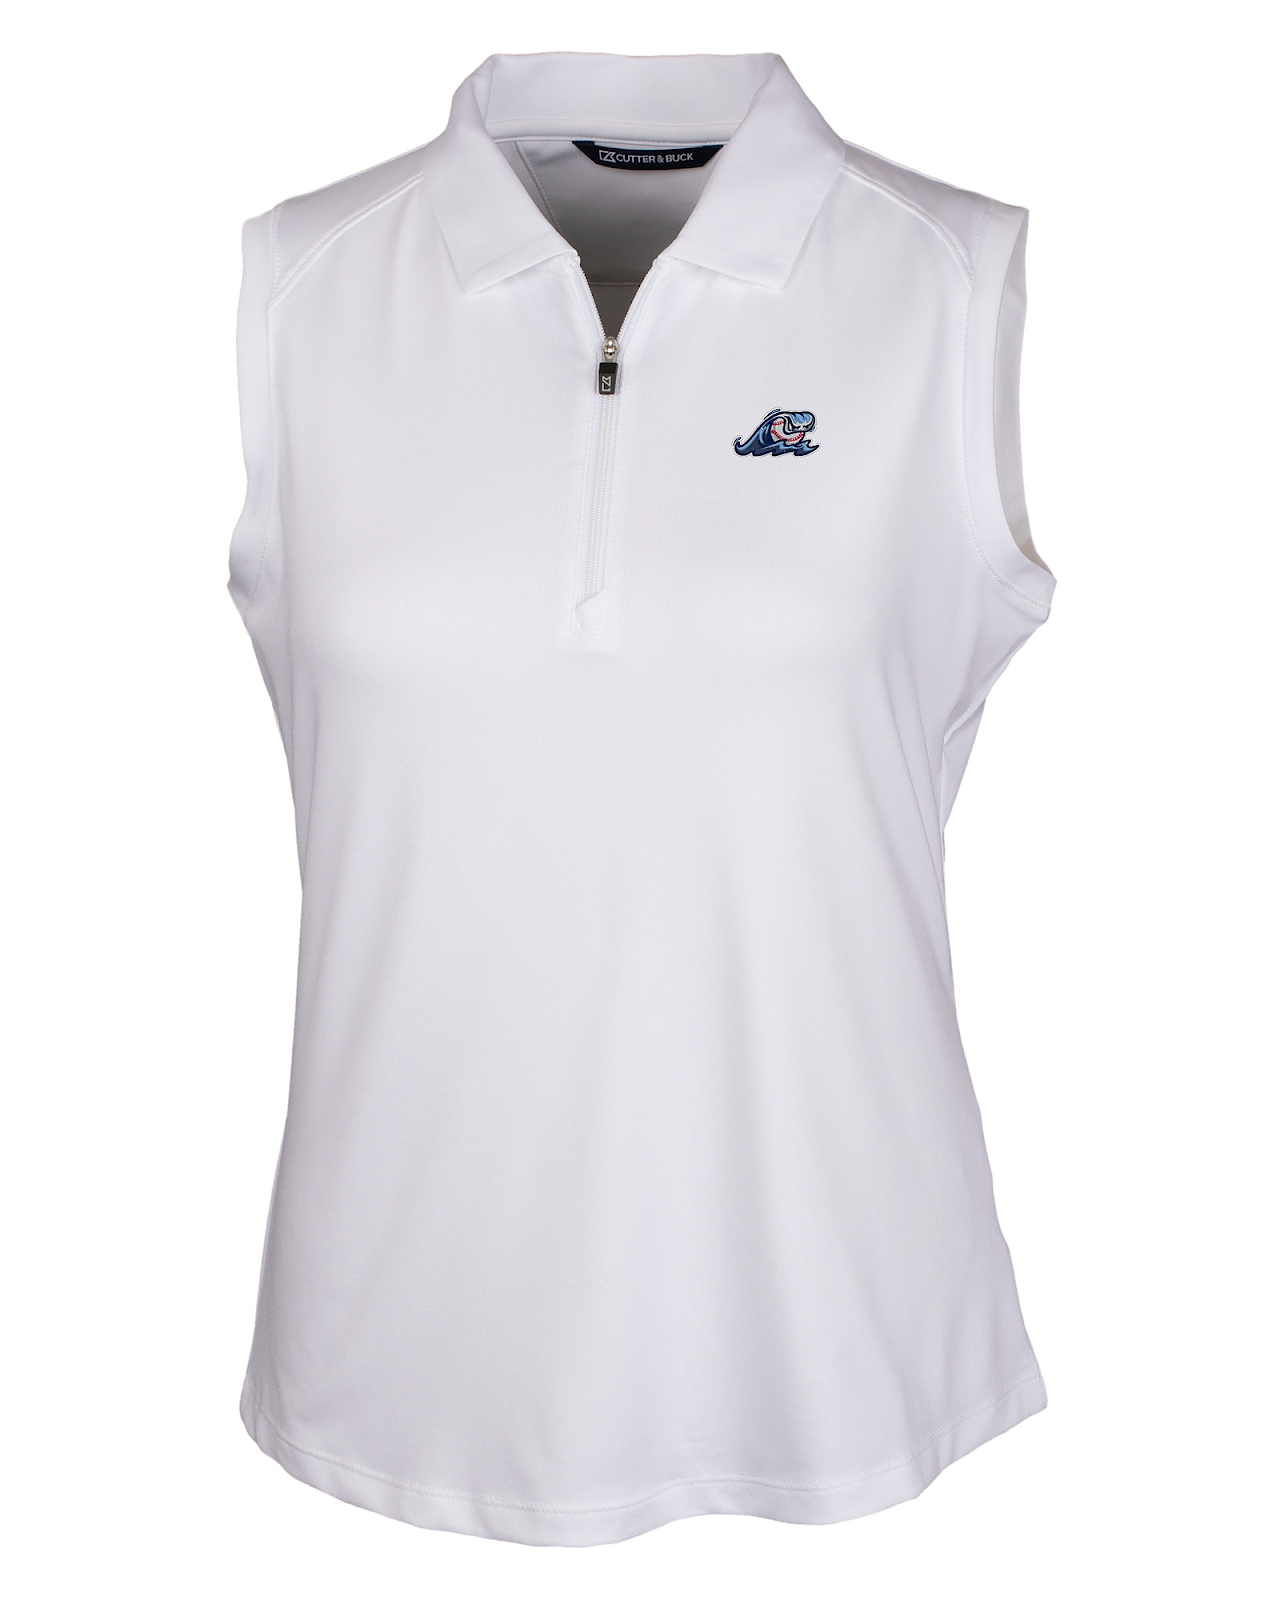 West Michigan Whitecaps Cutter & Buck Forge Stretch Womens Sleeveless Polo in white